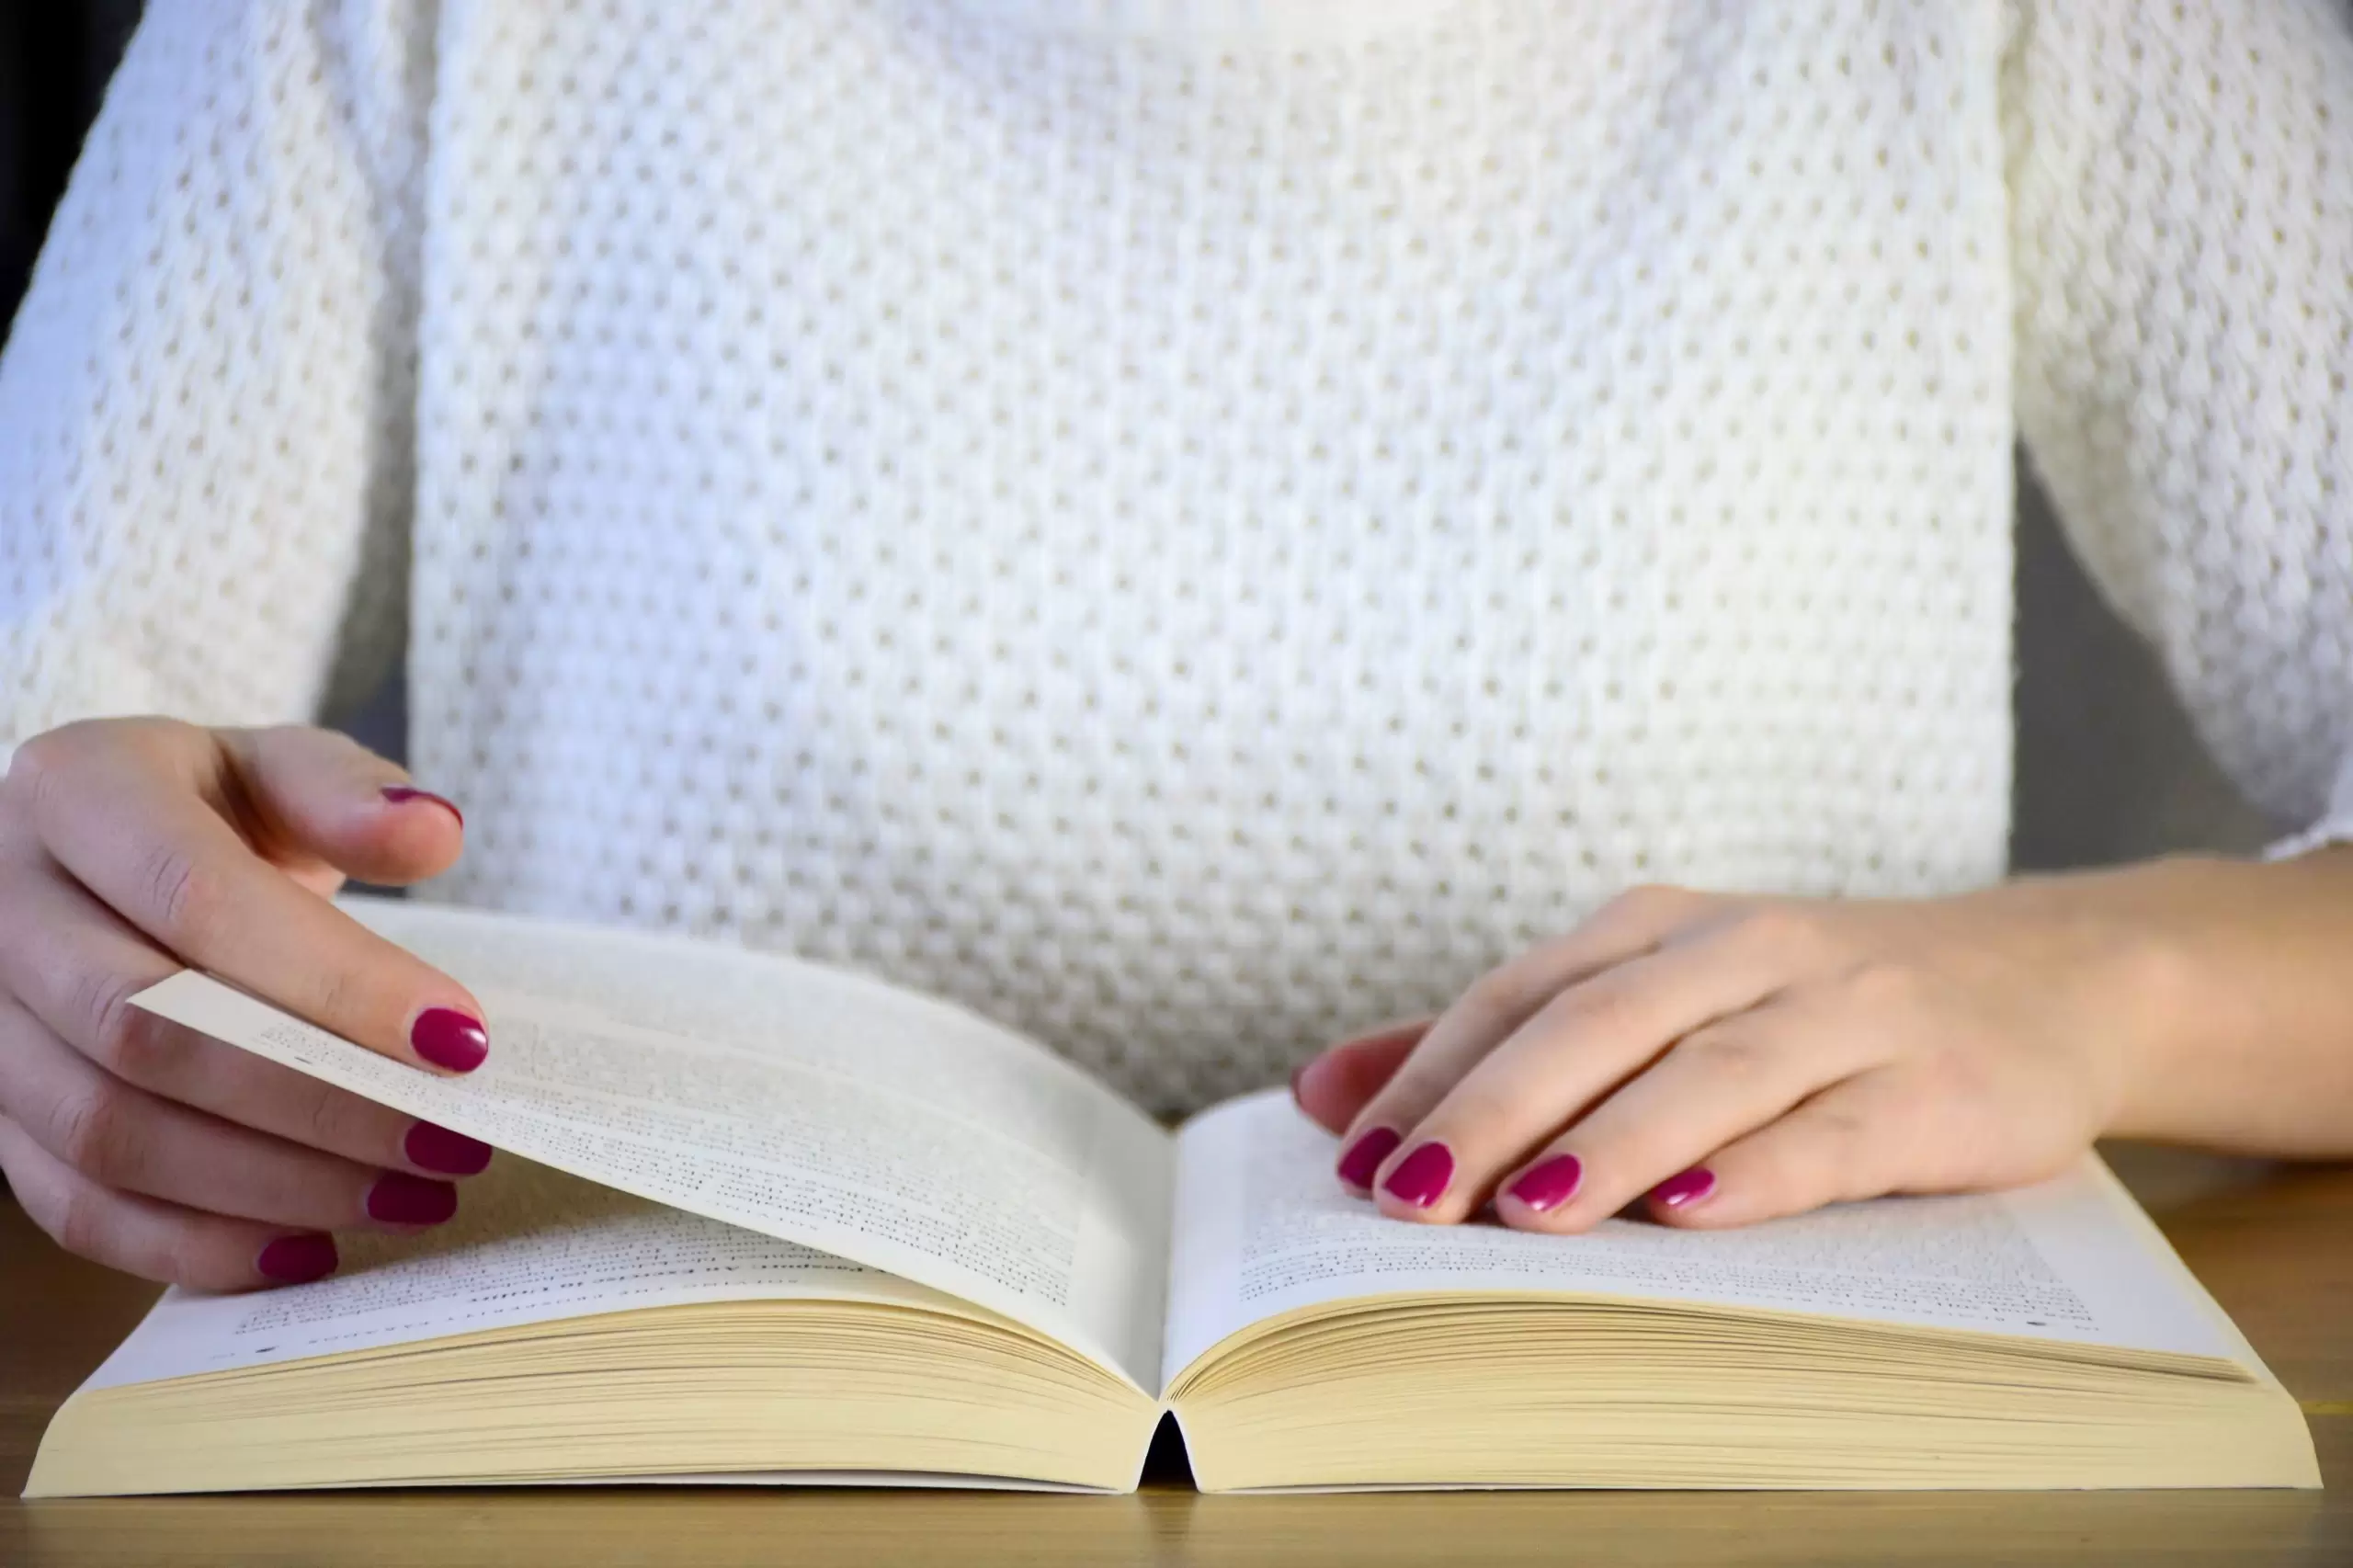 14 essential books for the savvy marketer